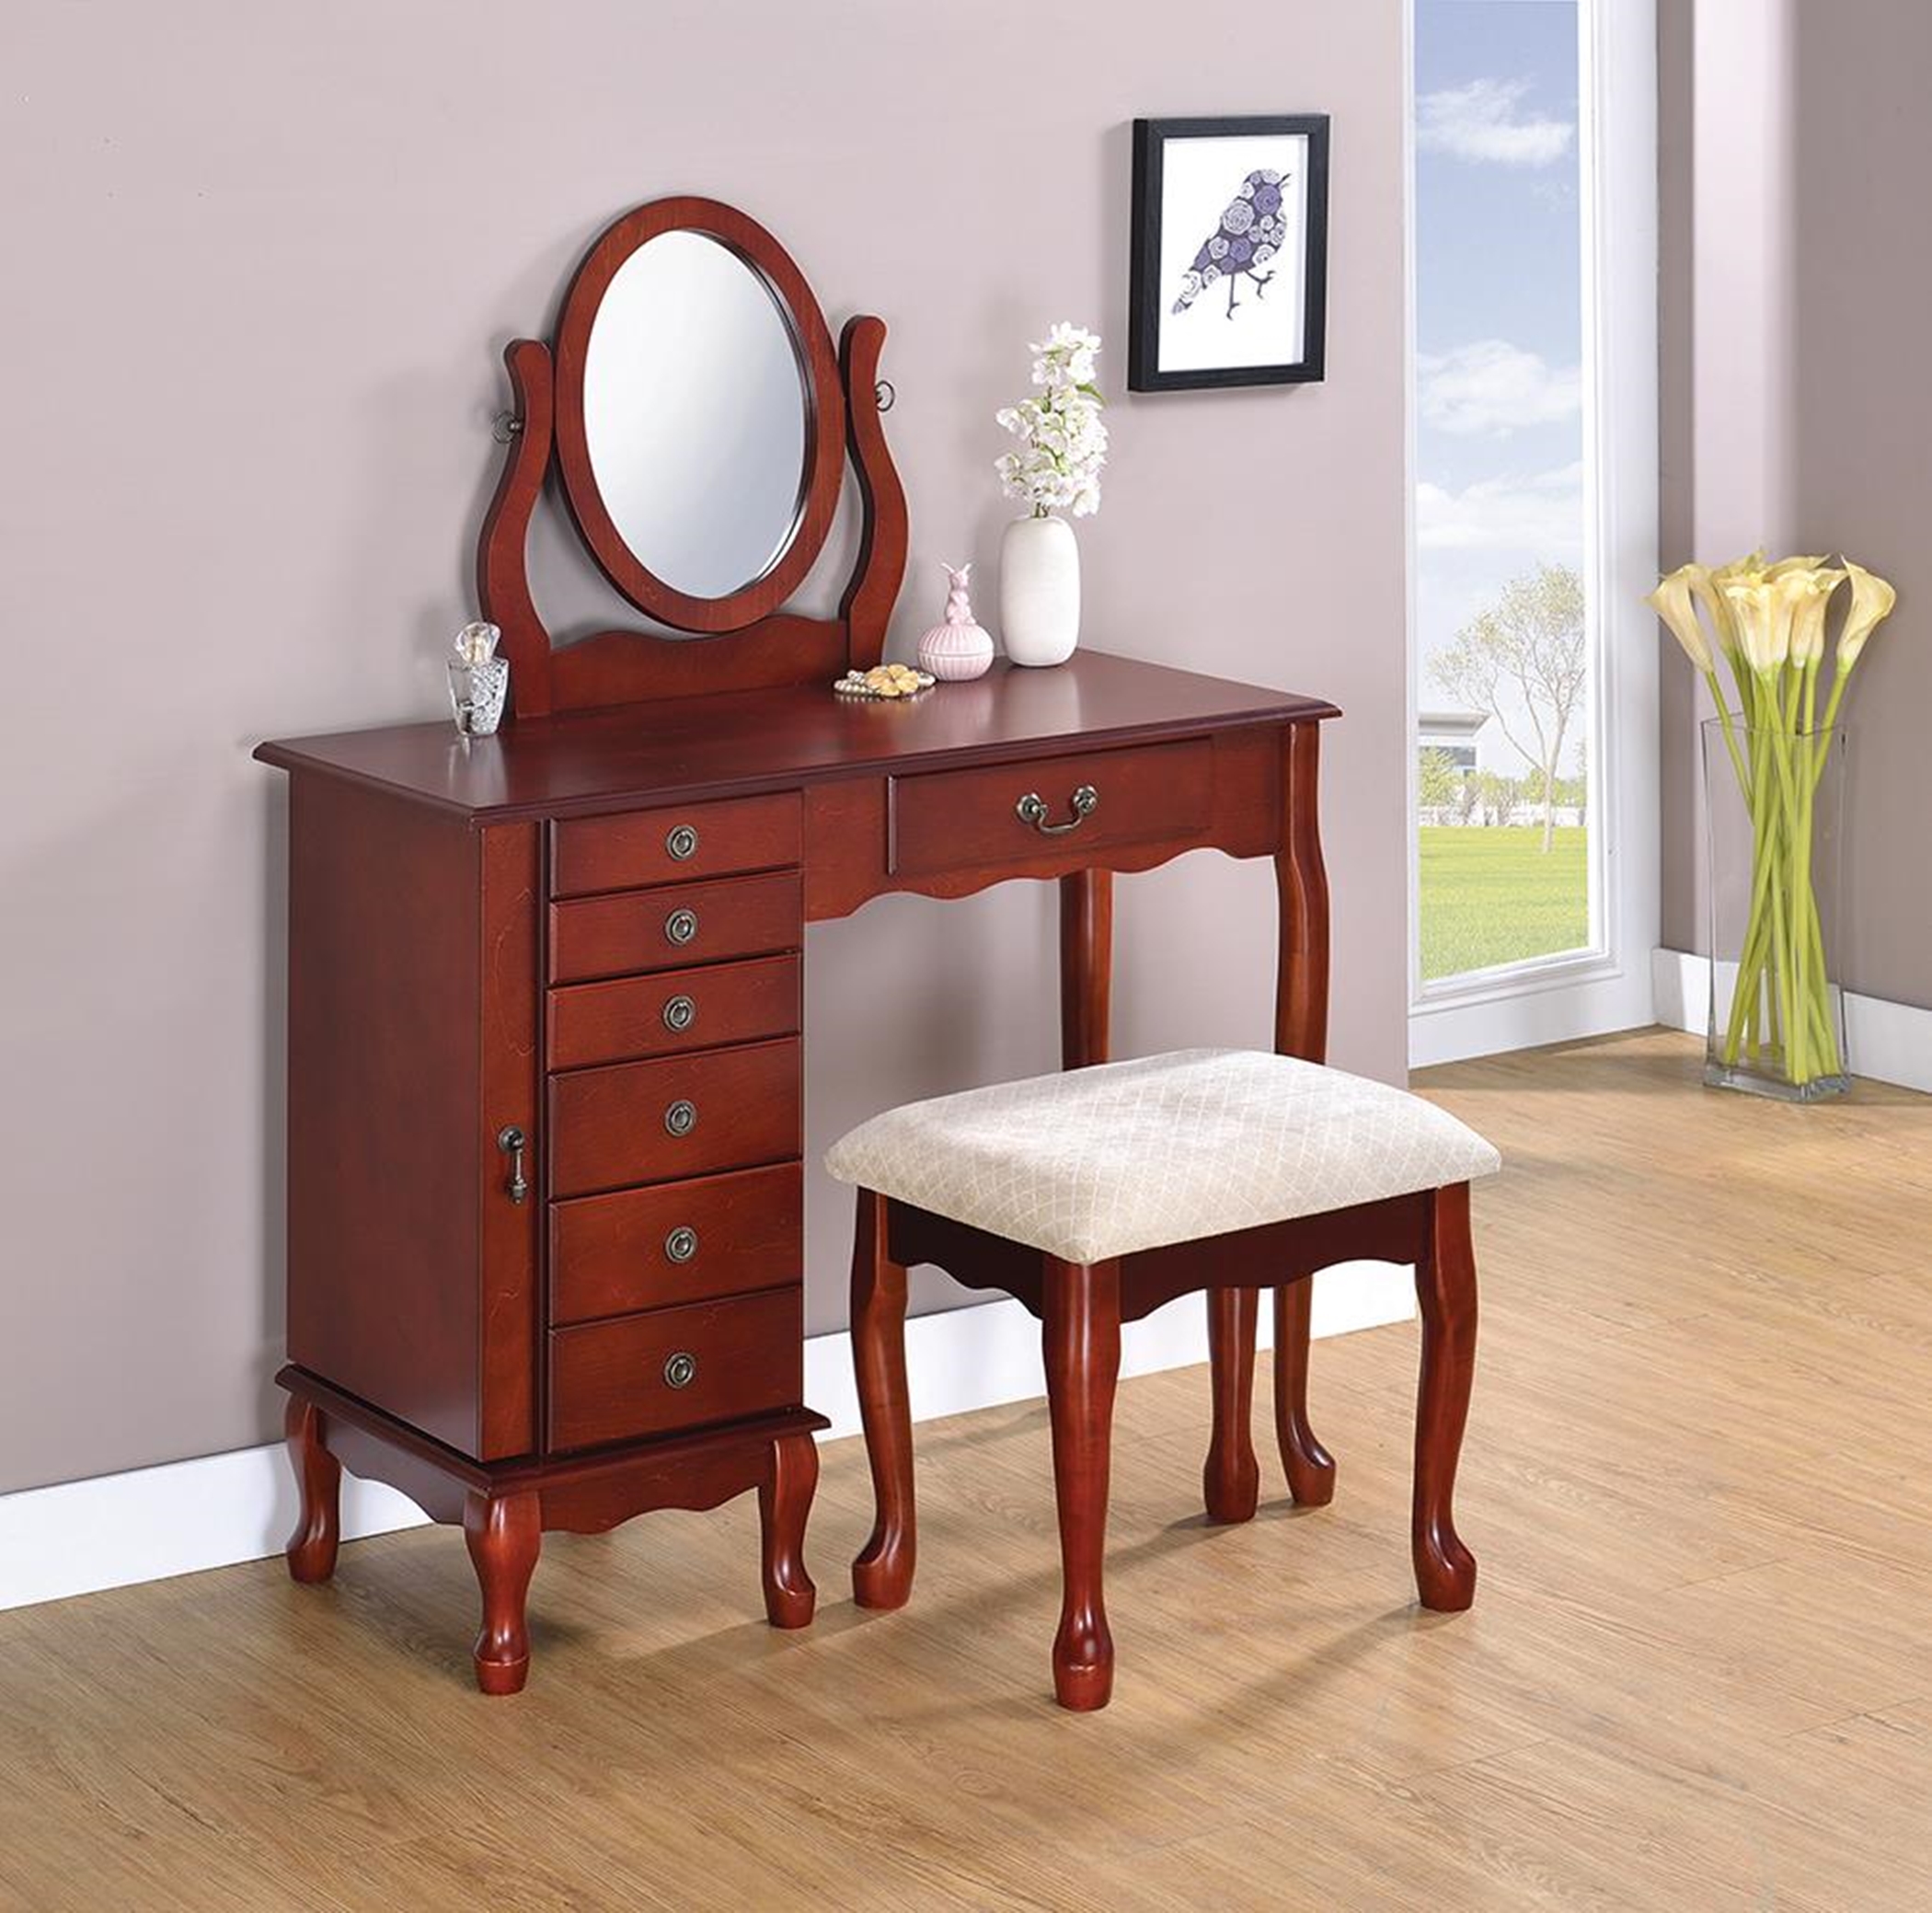 Transitional Brown Red Vanity Set - Click Image to Close